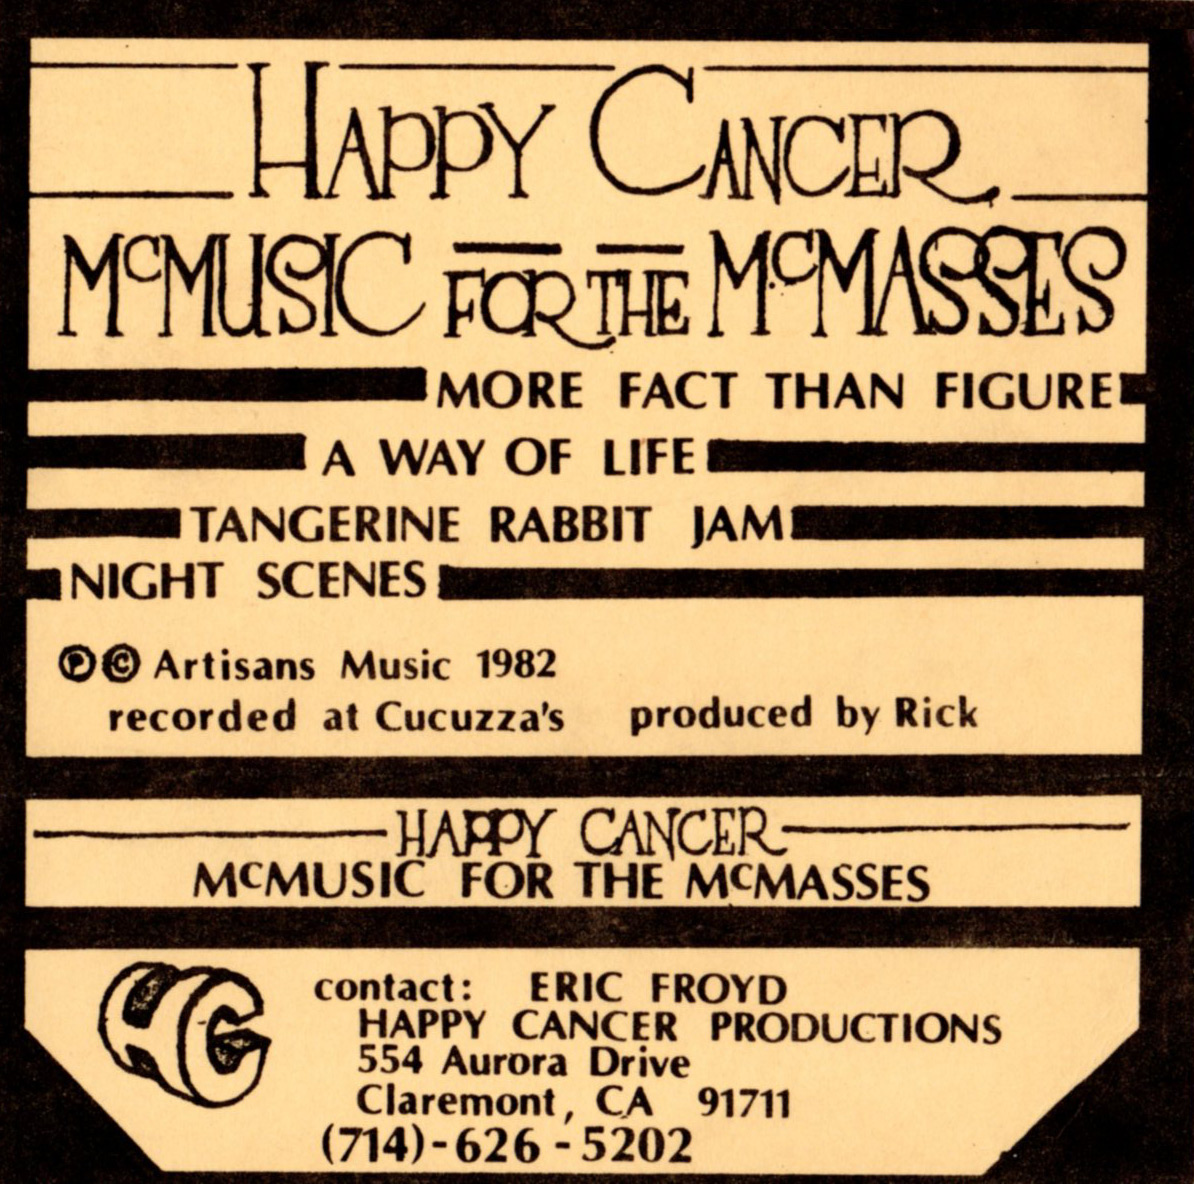 Happy Cancer: McMusic For The McMasses